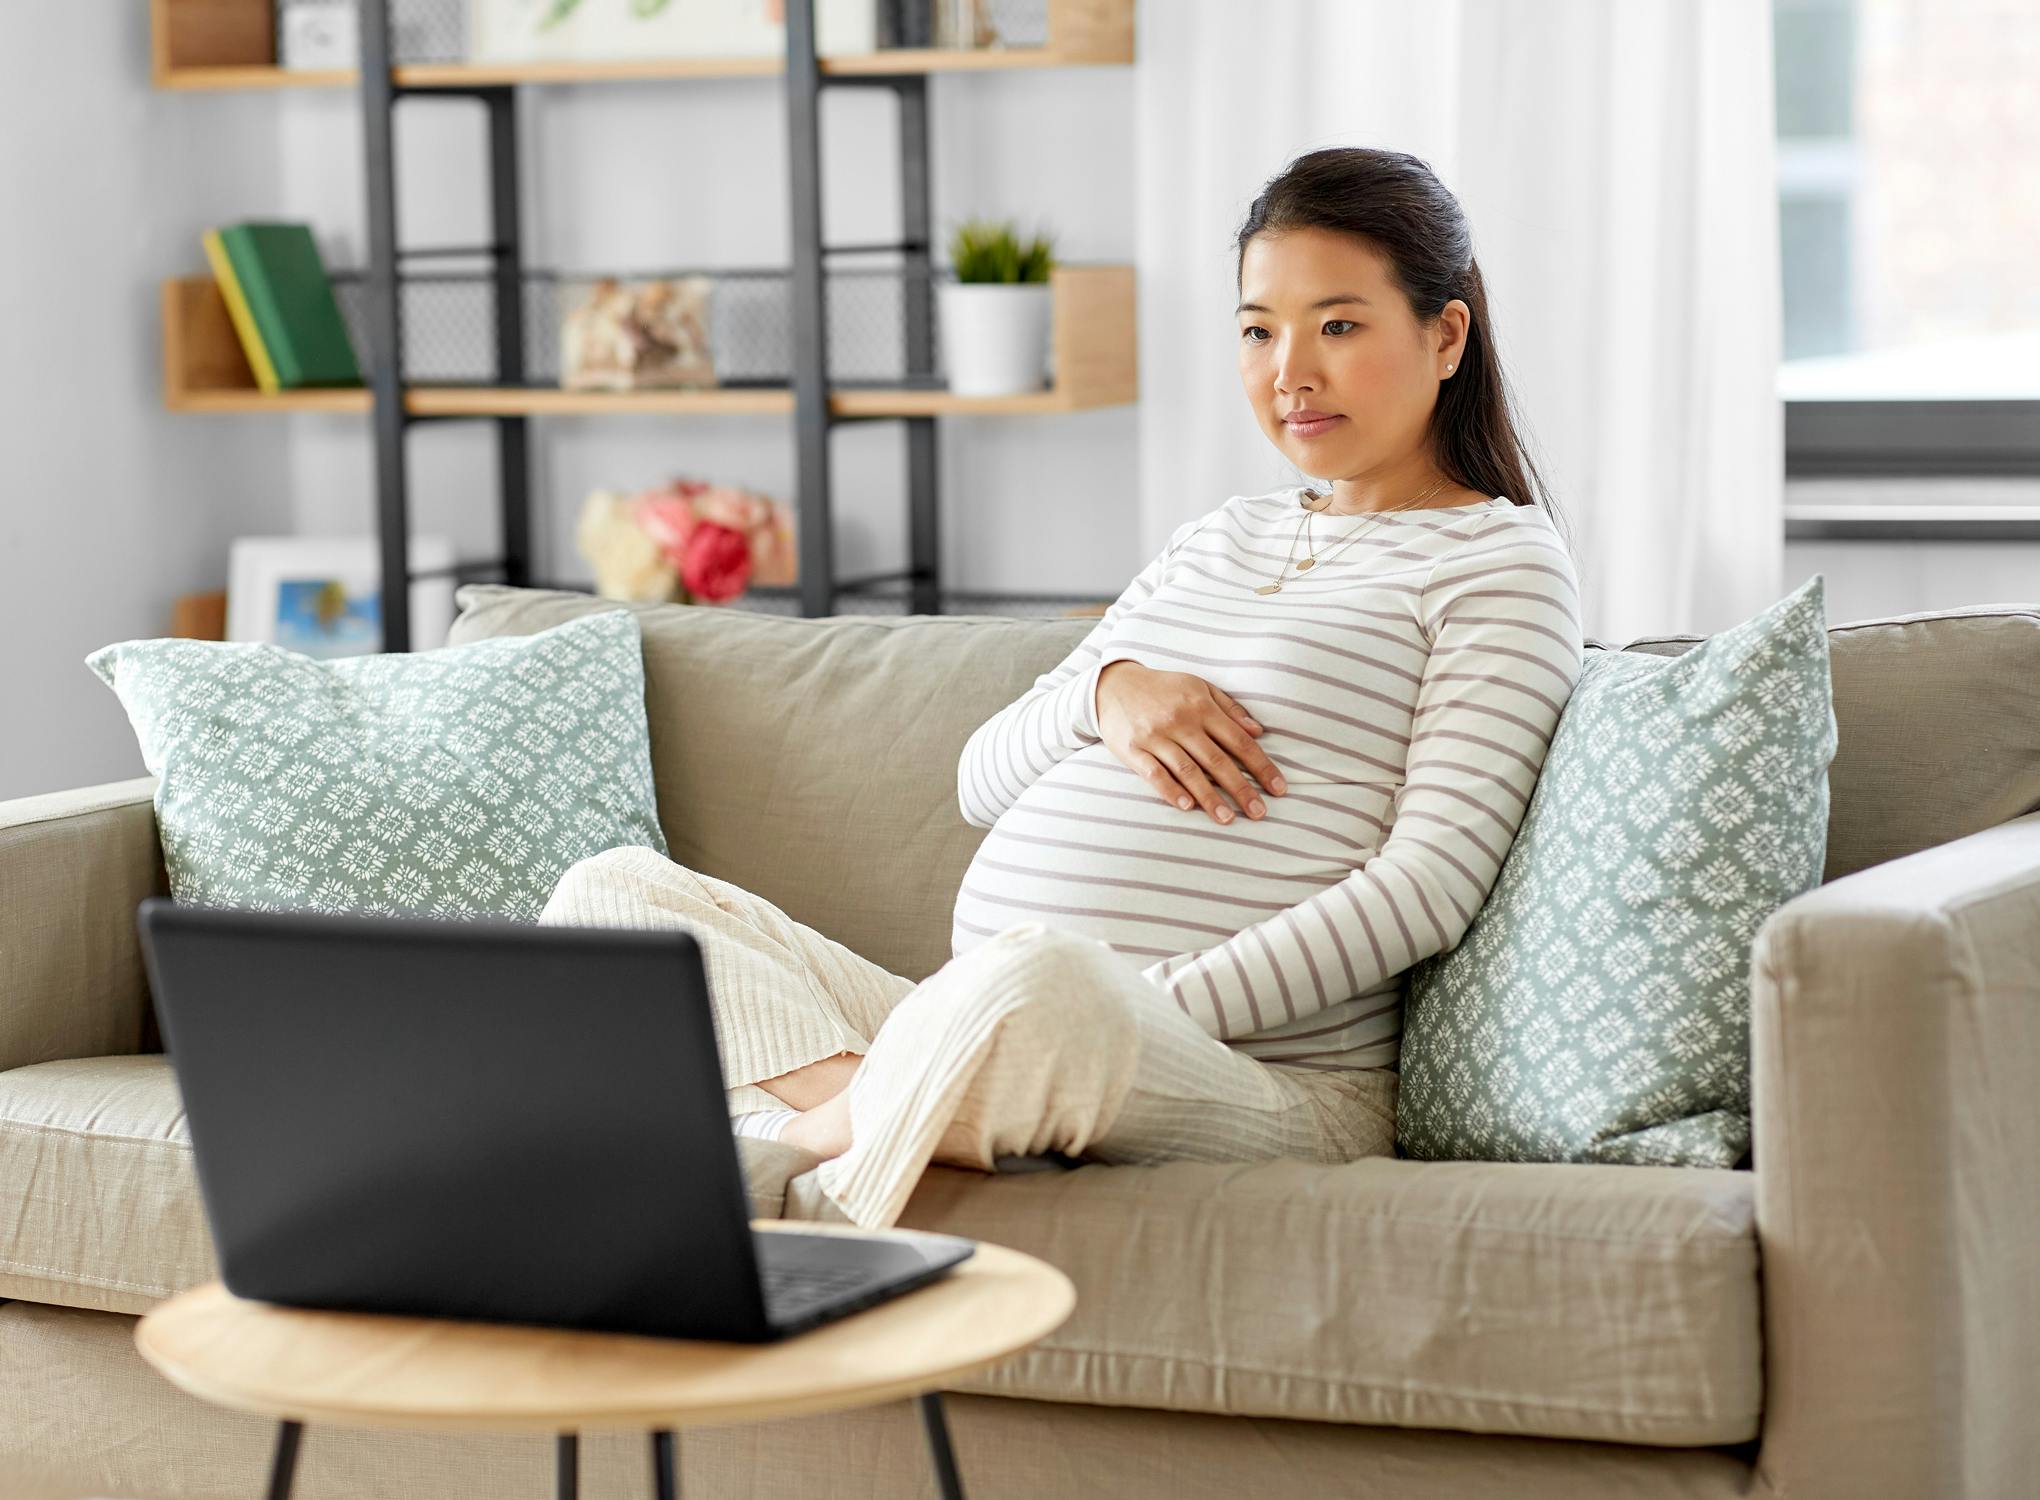 pregnant woman on sofa looking at laptop